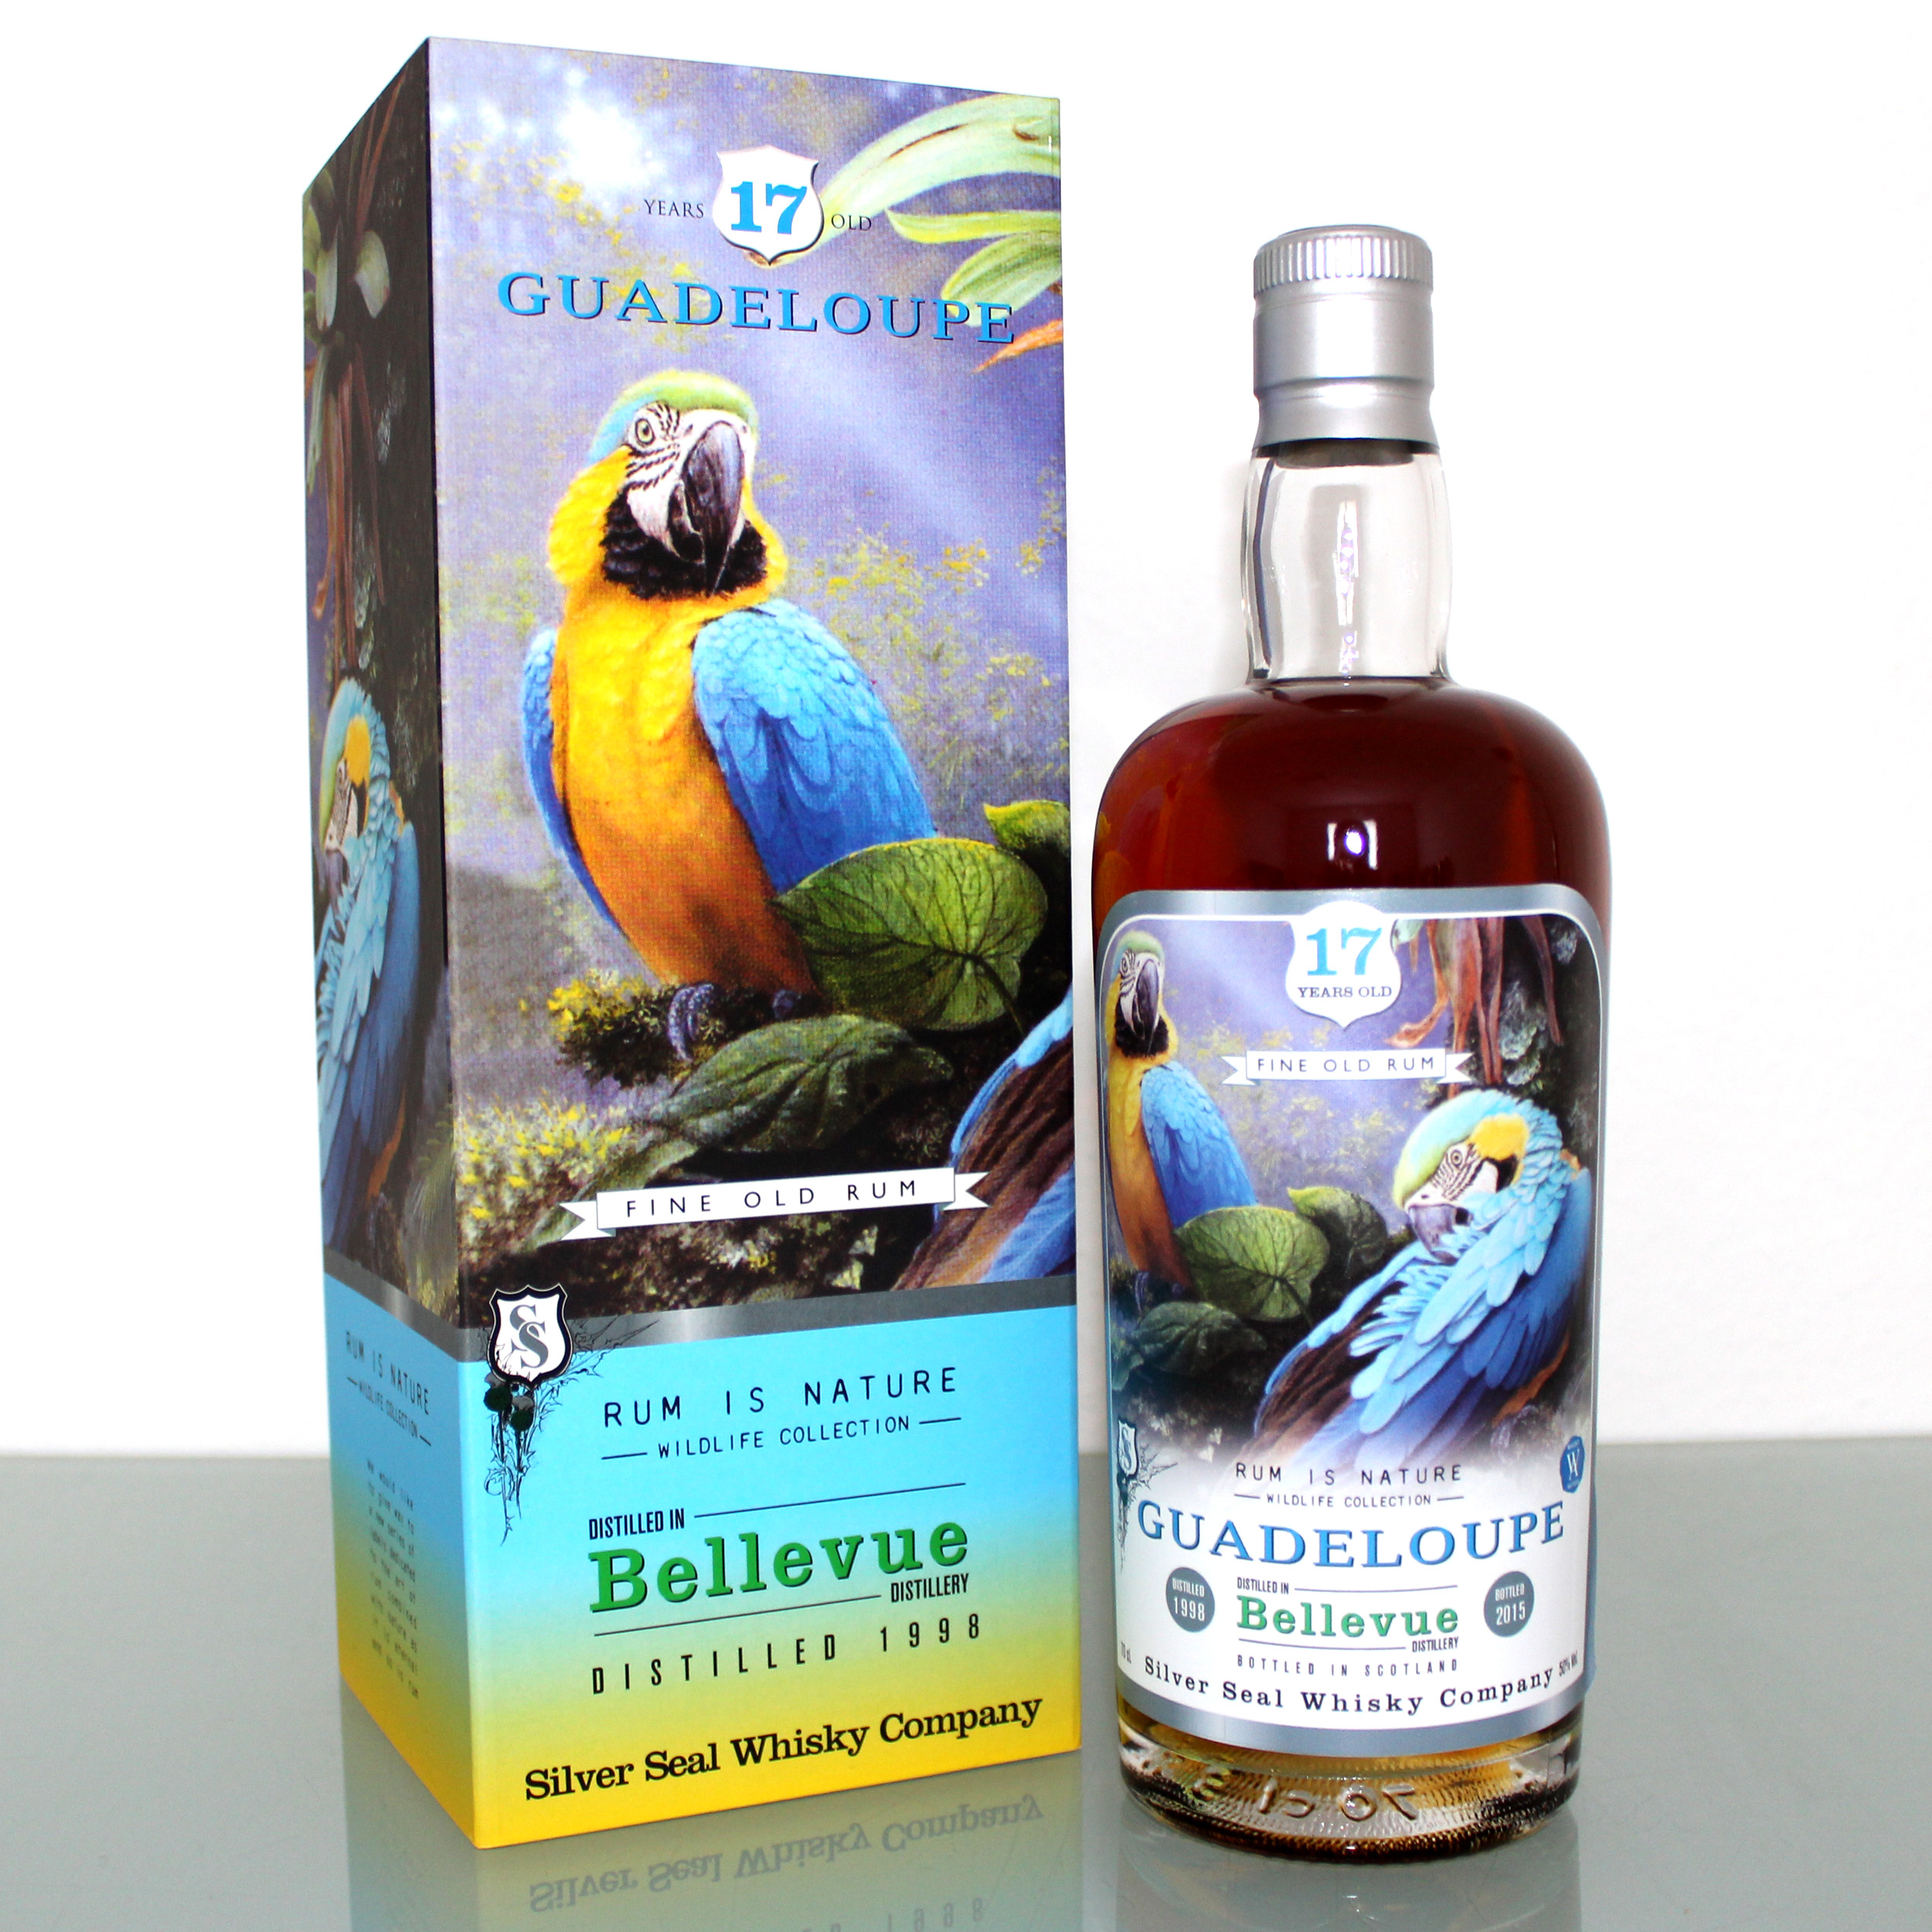 Bellevue Guadeloupe Rum Silver Seal 17 Years Old 1998 Wildlife Collection